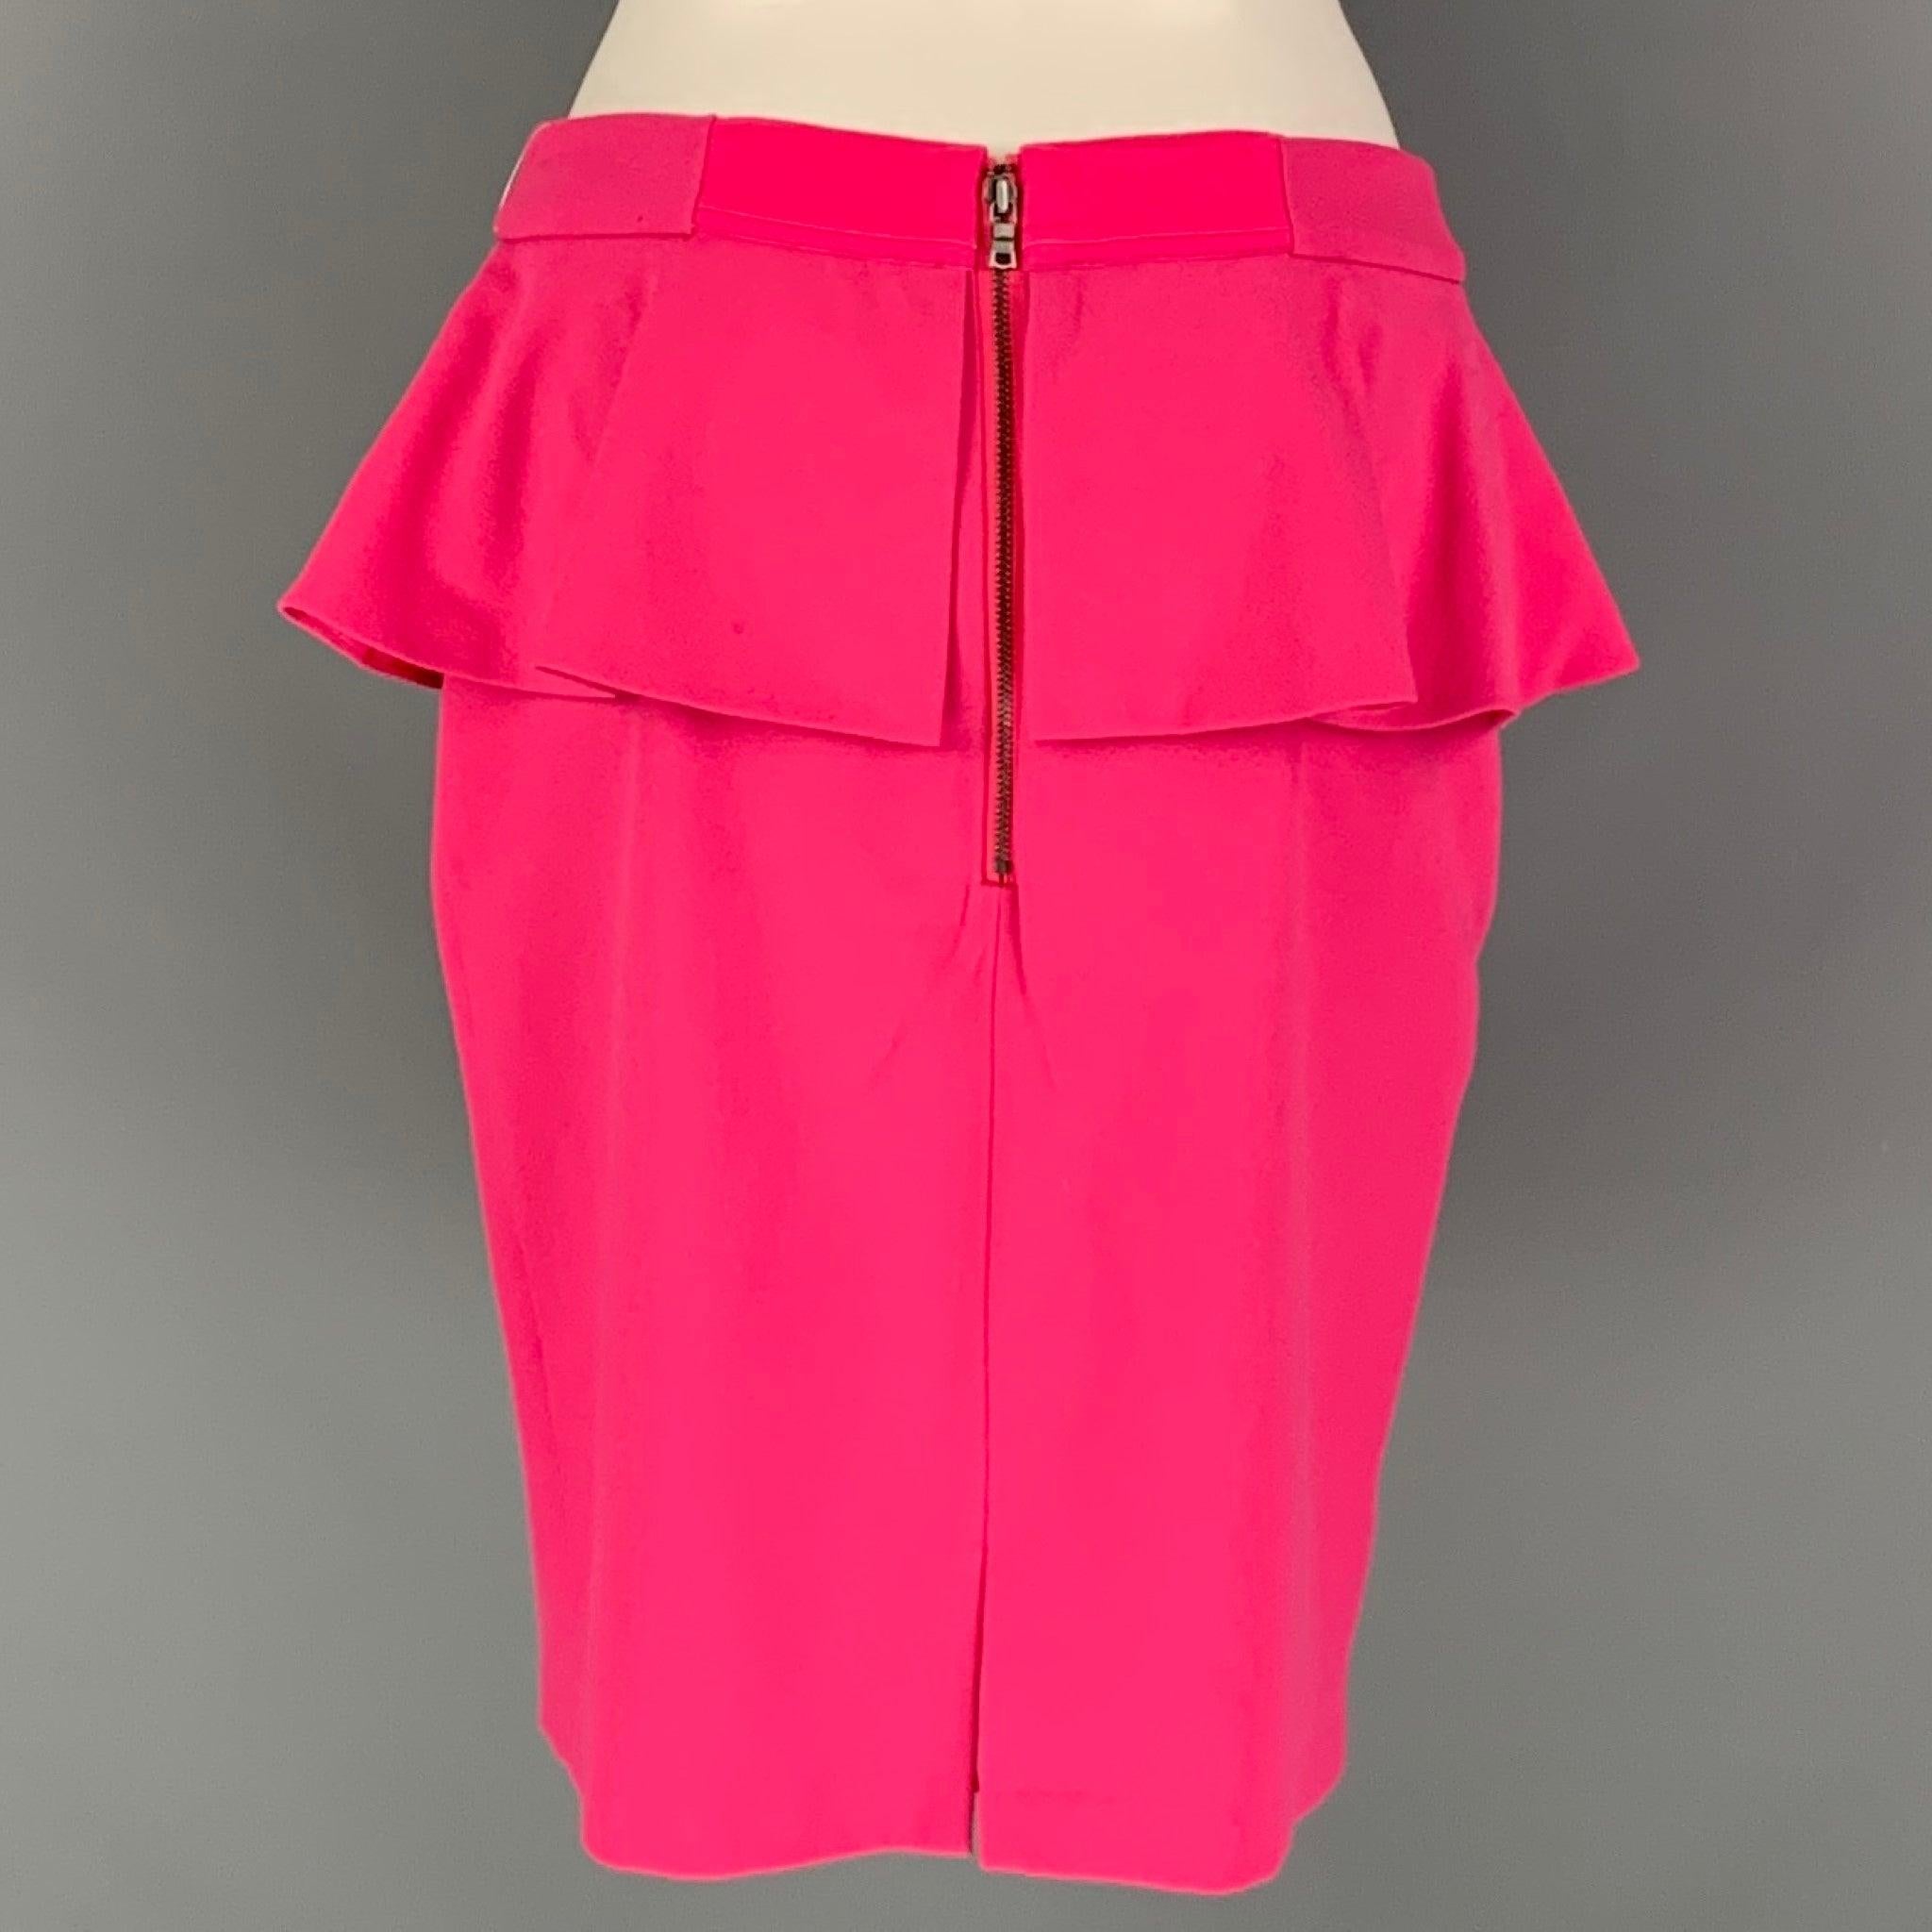 ALICE + OLIVIA skirt comes in a pink polyester blend knit material featuring peplum style, and zip up closure at center back.Excellent Pre-Owned Condition. 

Marked:   6 

Measurements: 
  Waist: 30 inHip: 39 inches Length: 20 inches 
 
 
  
  
